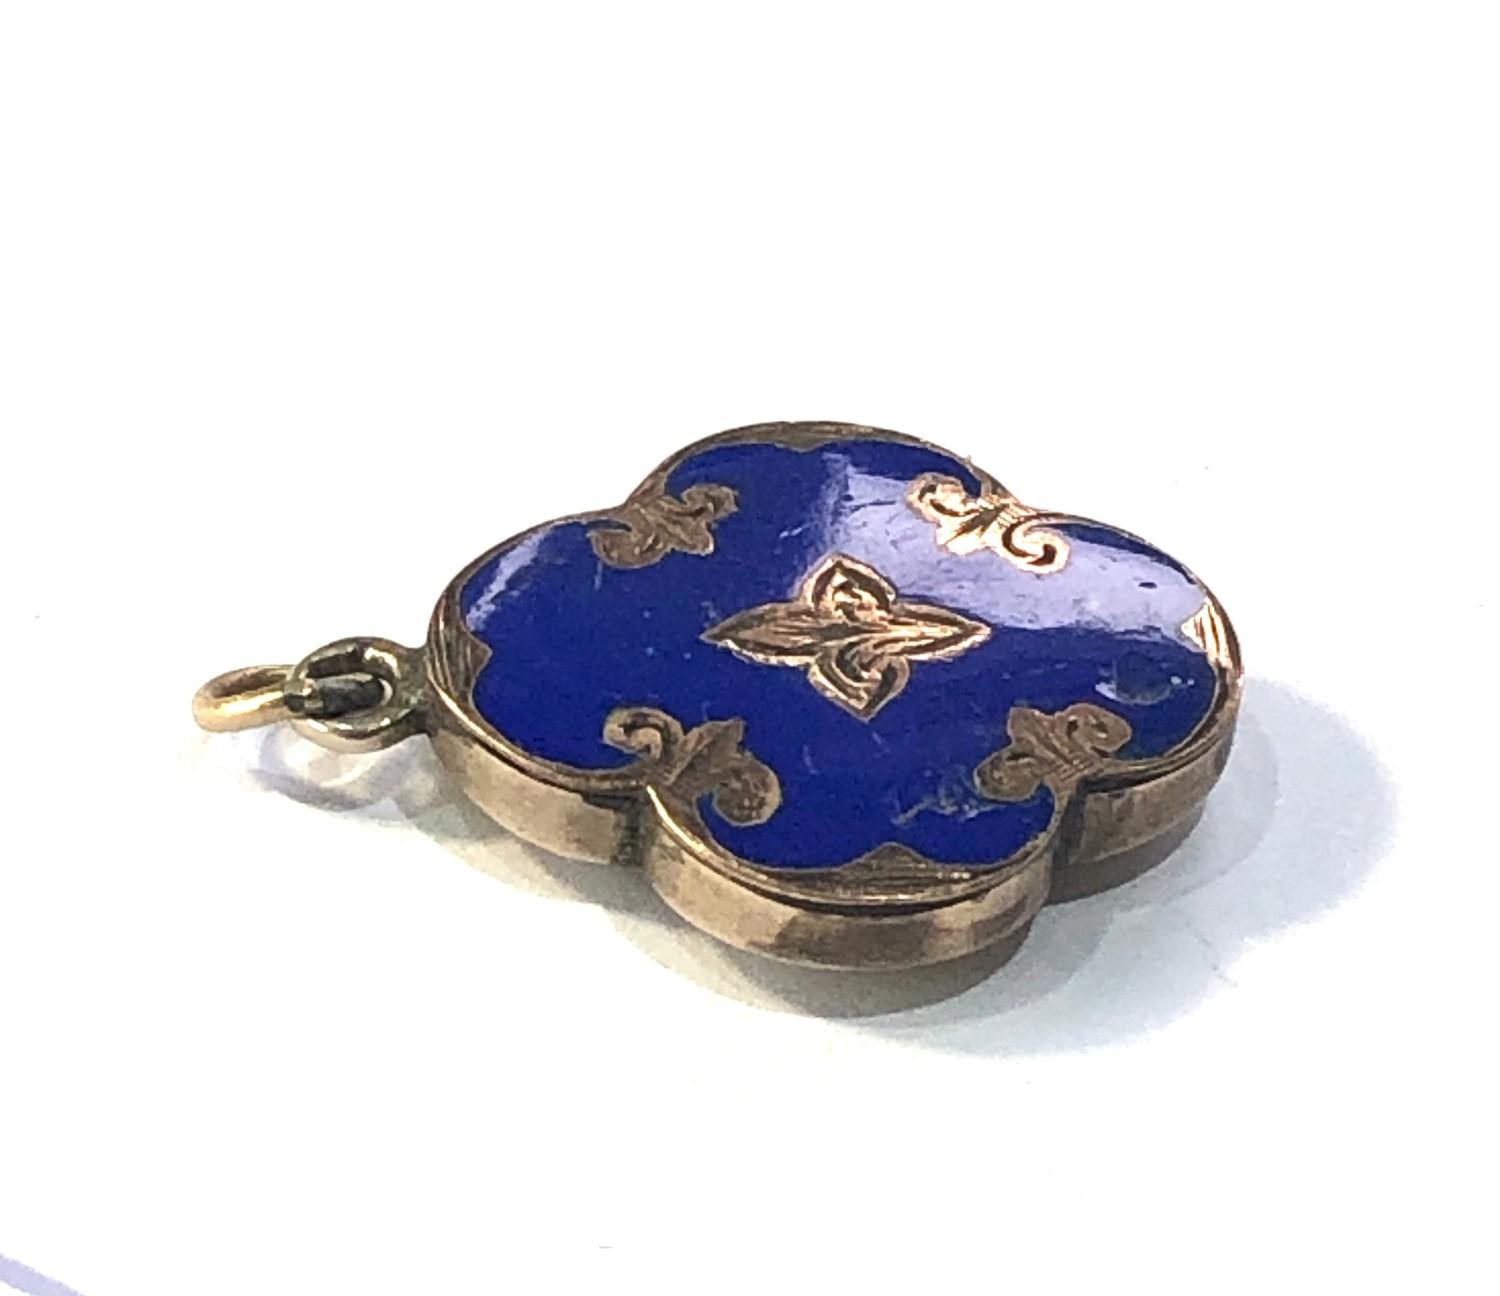 Antique gold enamel mourning hair locket pendant measures approx 2.3cm drop by 17mm wide - Image 2 of 3